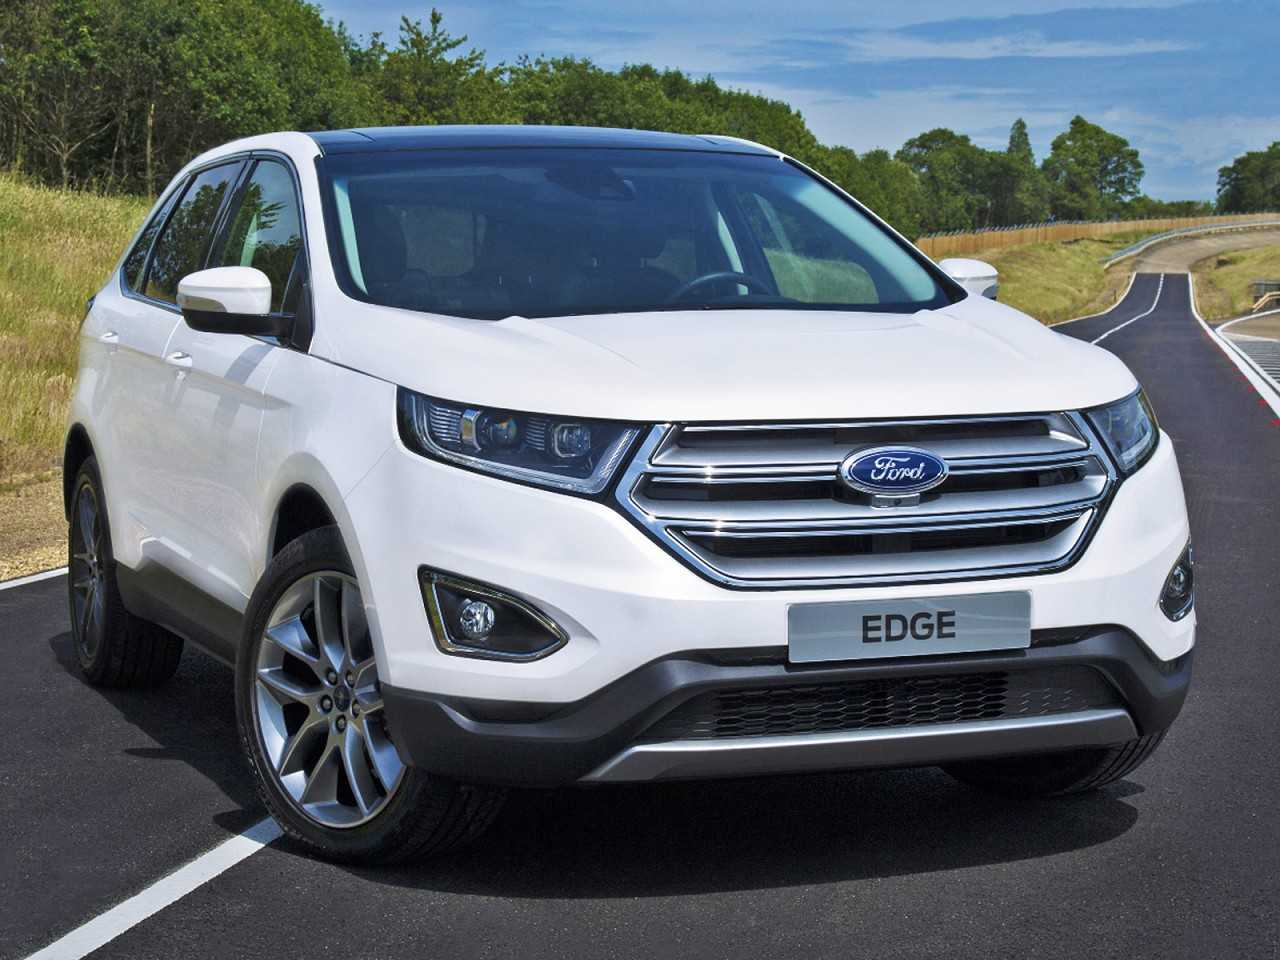 FordEdge 2017 - ngulo frontal